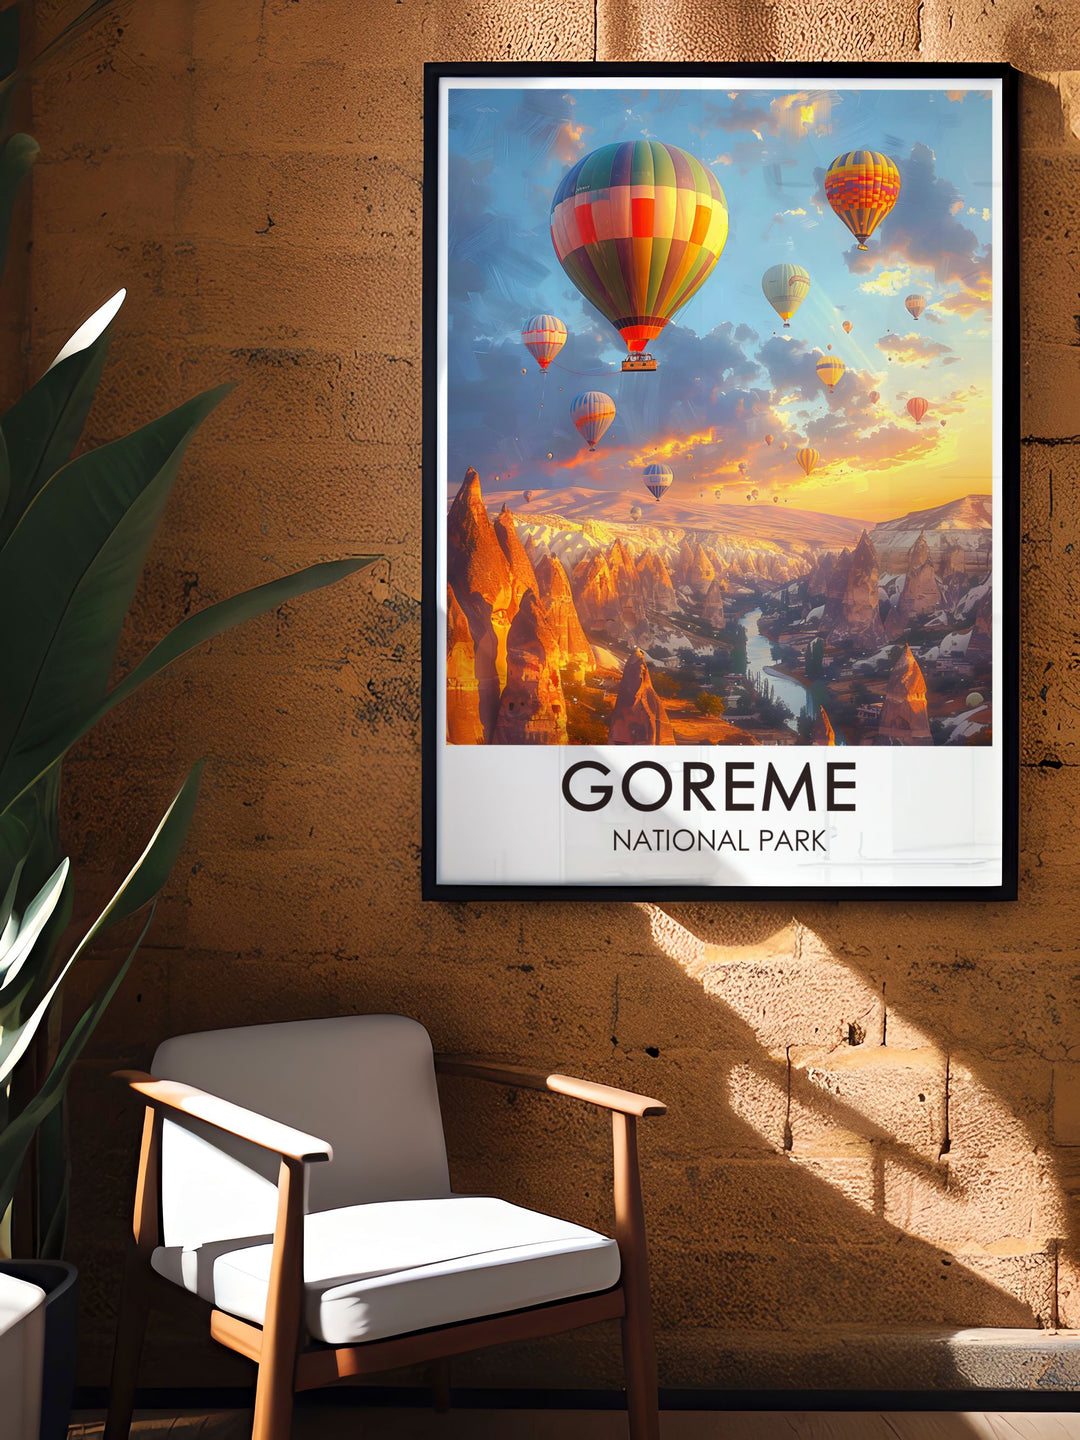 Highlighting the extraordinary landscape of Goreme National Park in Turkey, this poster captures the mystical Fairy Chimneys and the tranquil hot air balloons, making it an excellent addition for those who appreciate natural beauty.